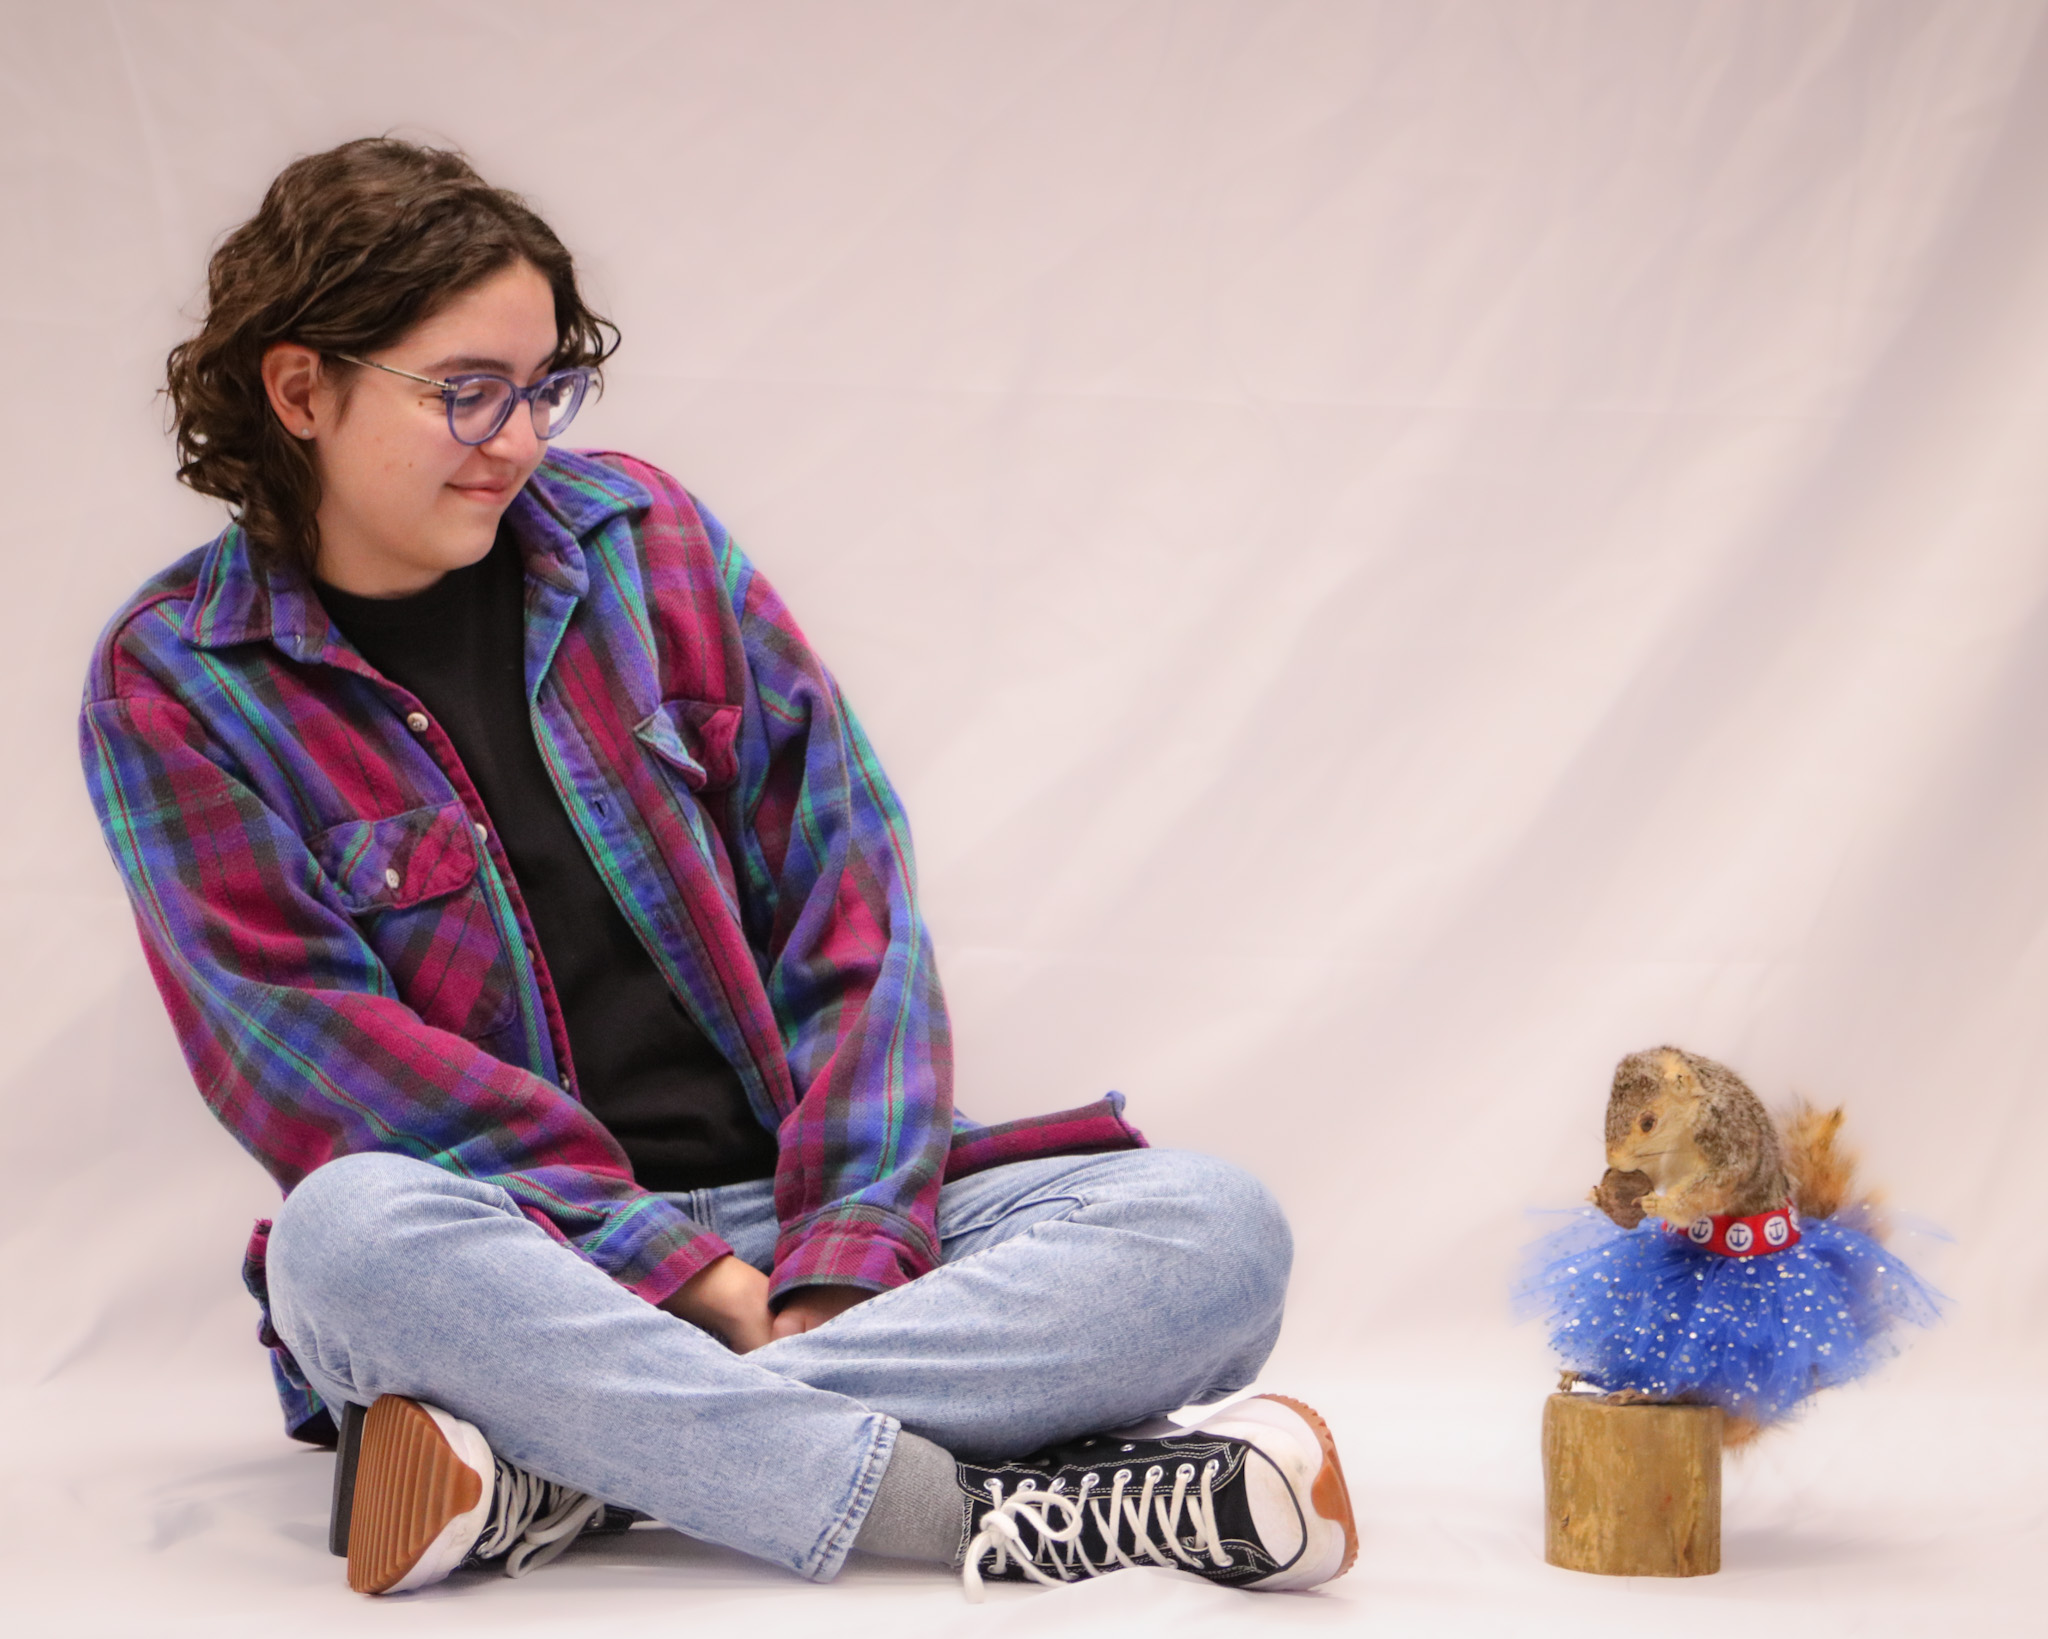 Julia, sitting on the floor in front of a white background, leaning away from a squirrel wearing a blue tutu mounted on a block of wood.